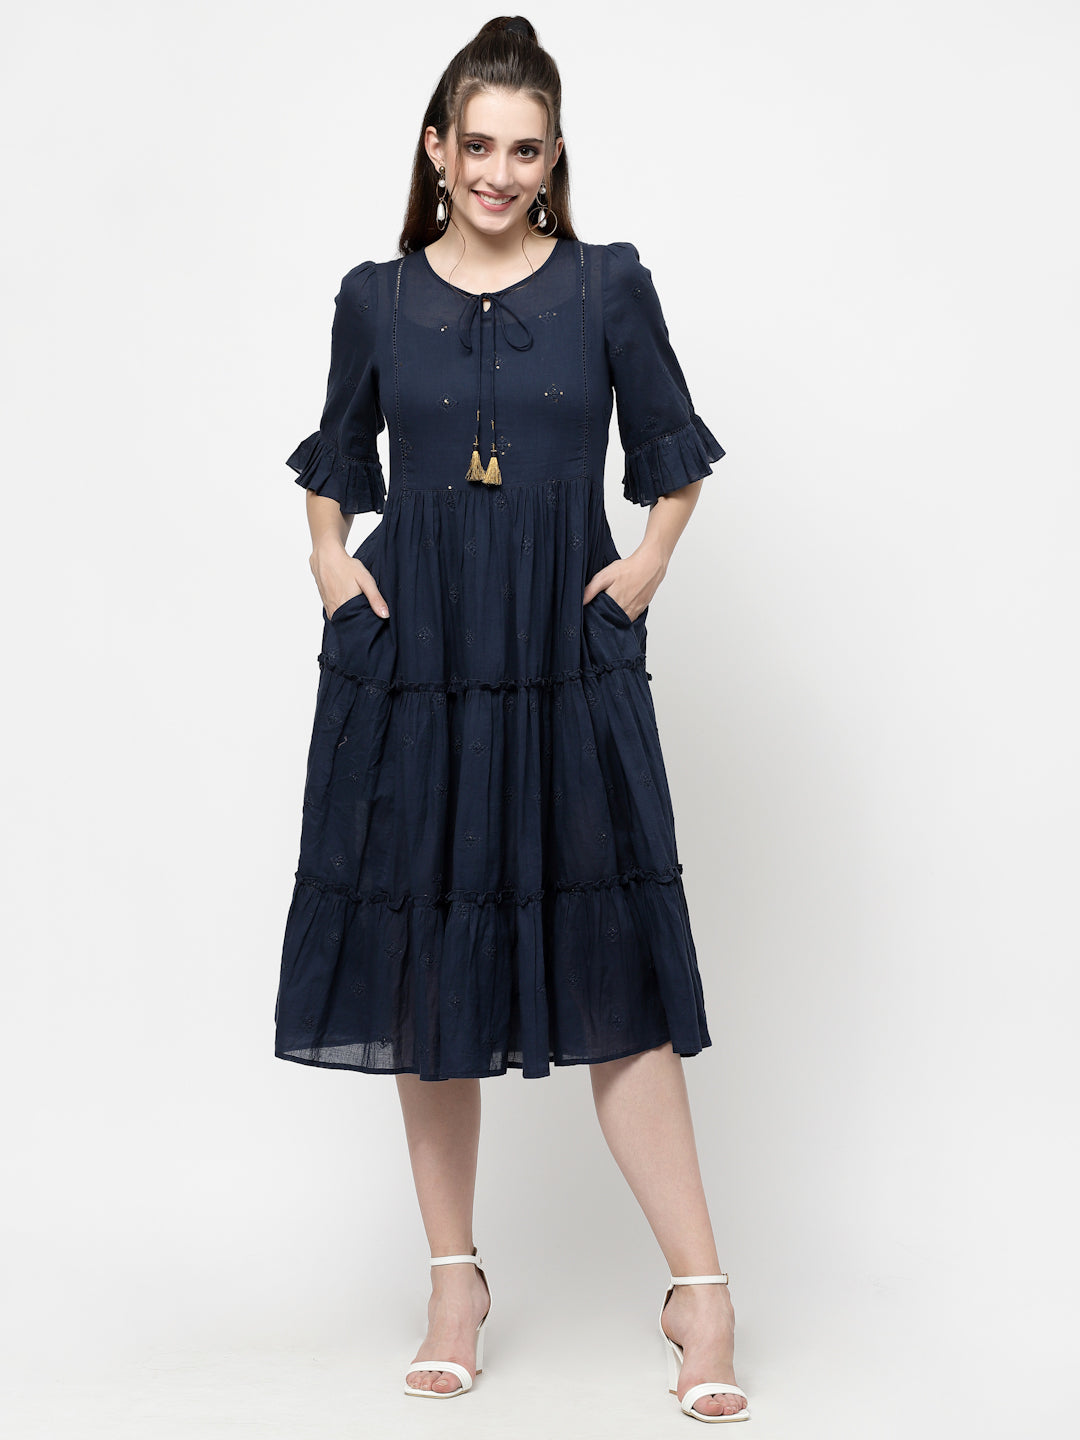 Terquois Embroidered Woven Dress with Lace,Tie-Up neck and Fashion sleeves Dresses TERQUOIS   